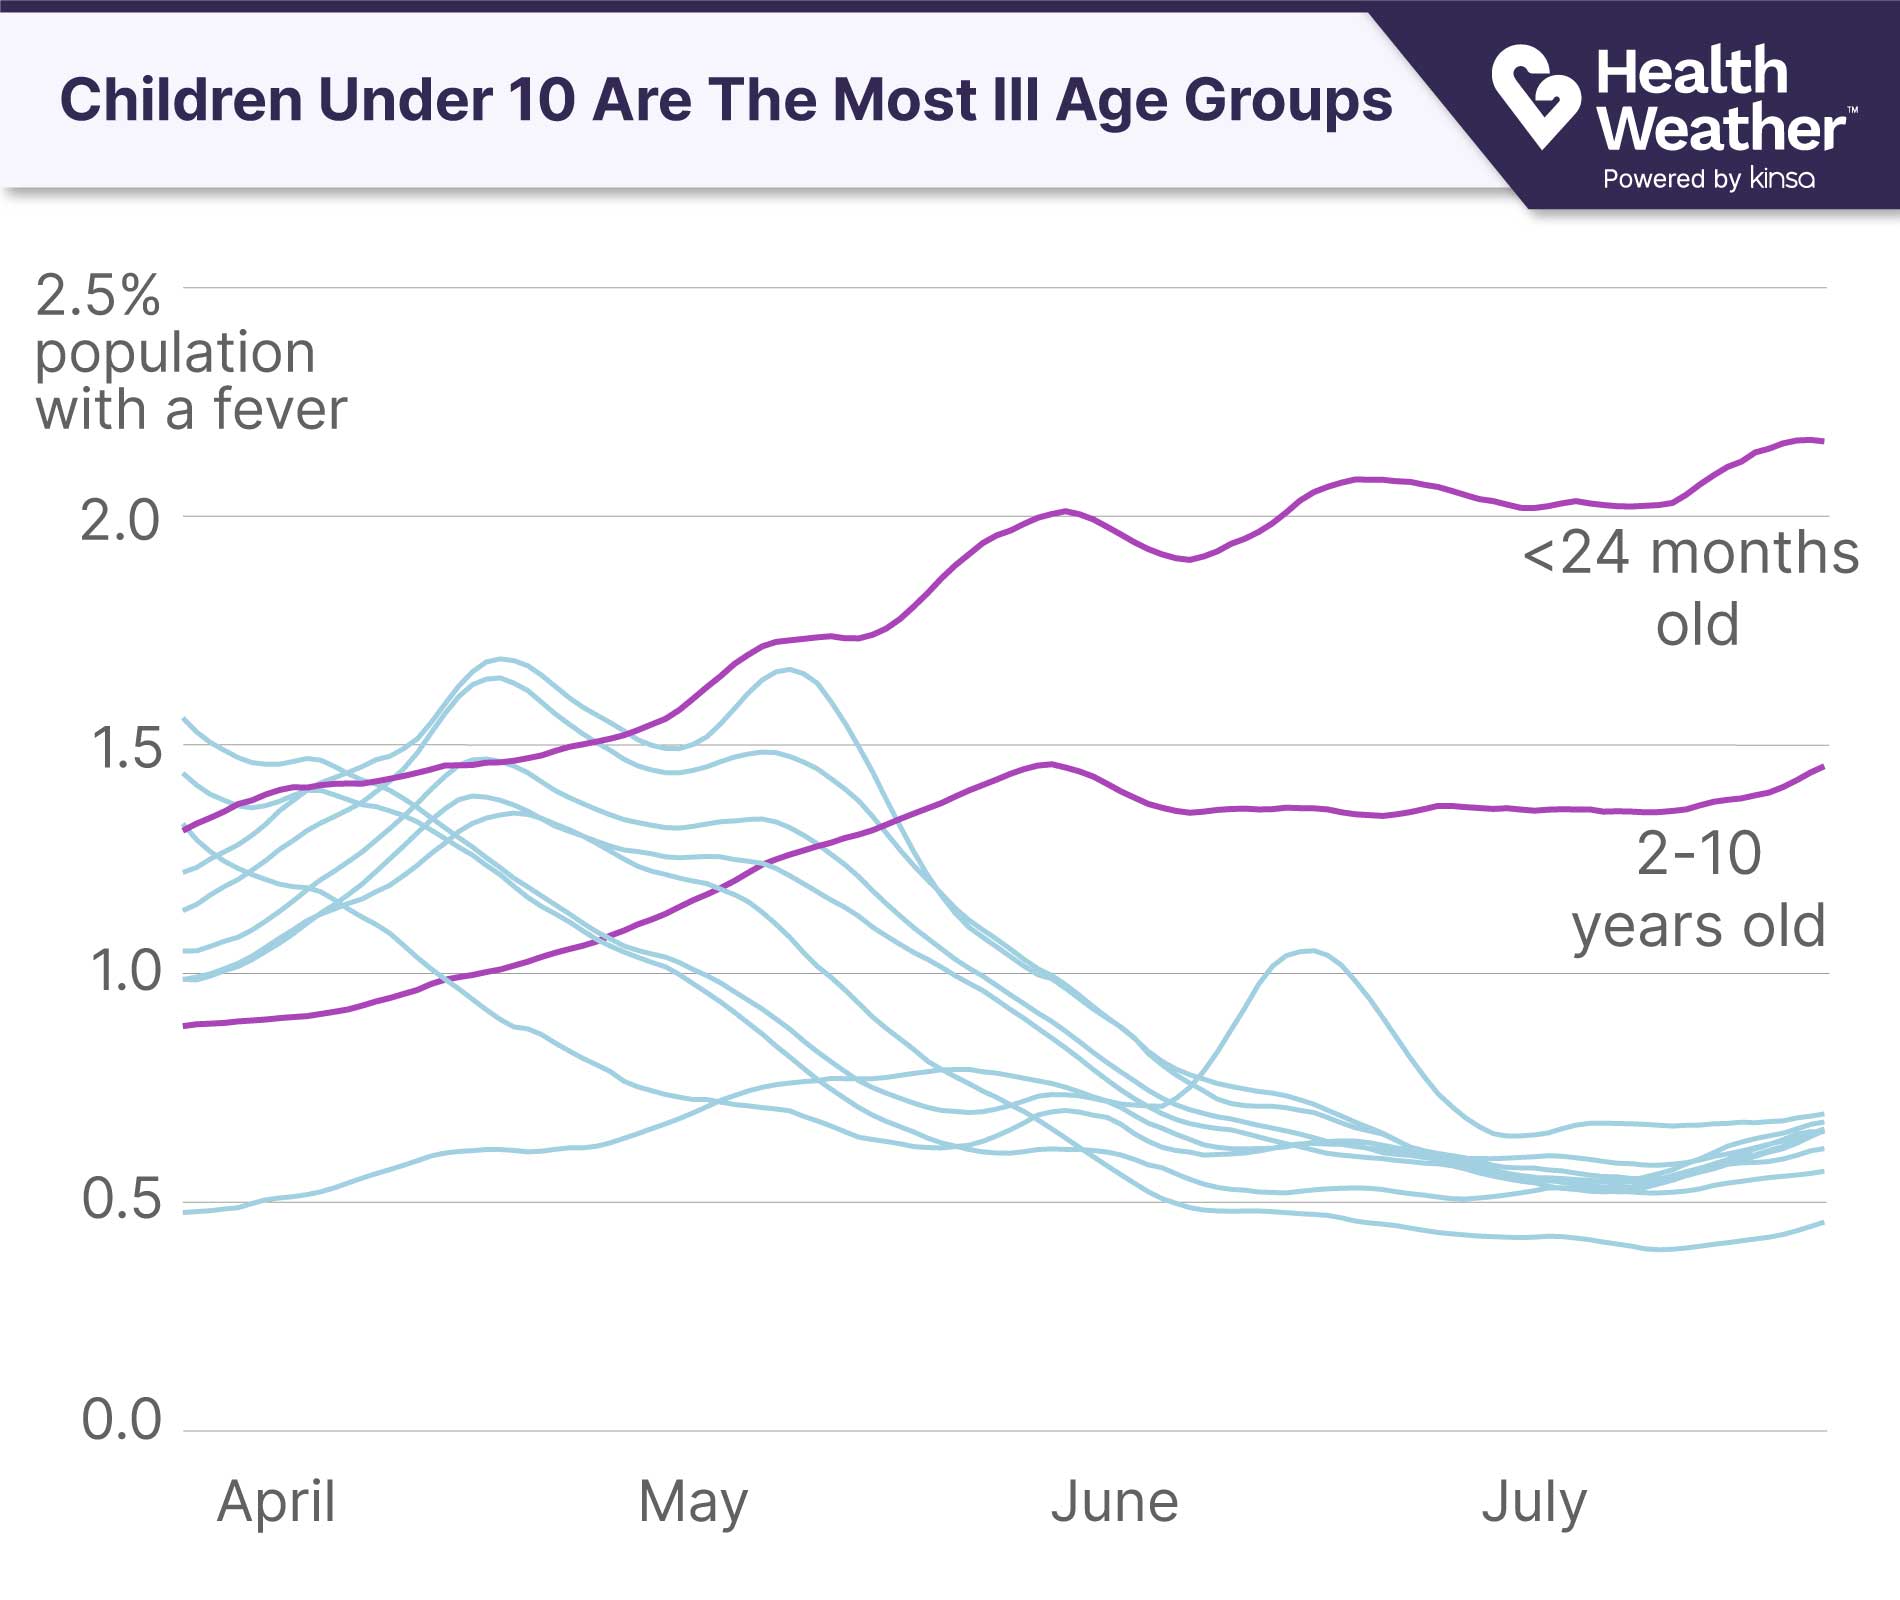 Graph showing children under 10 as more sick than any other age group